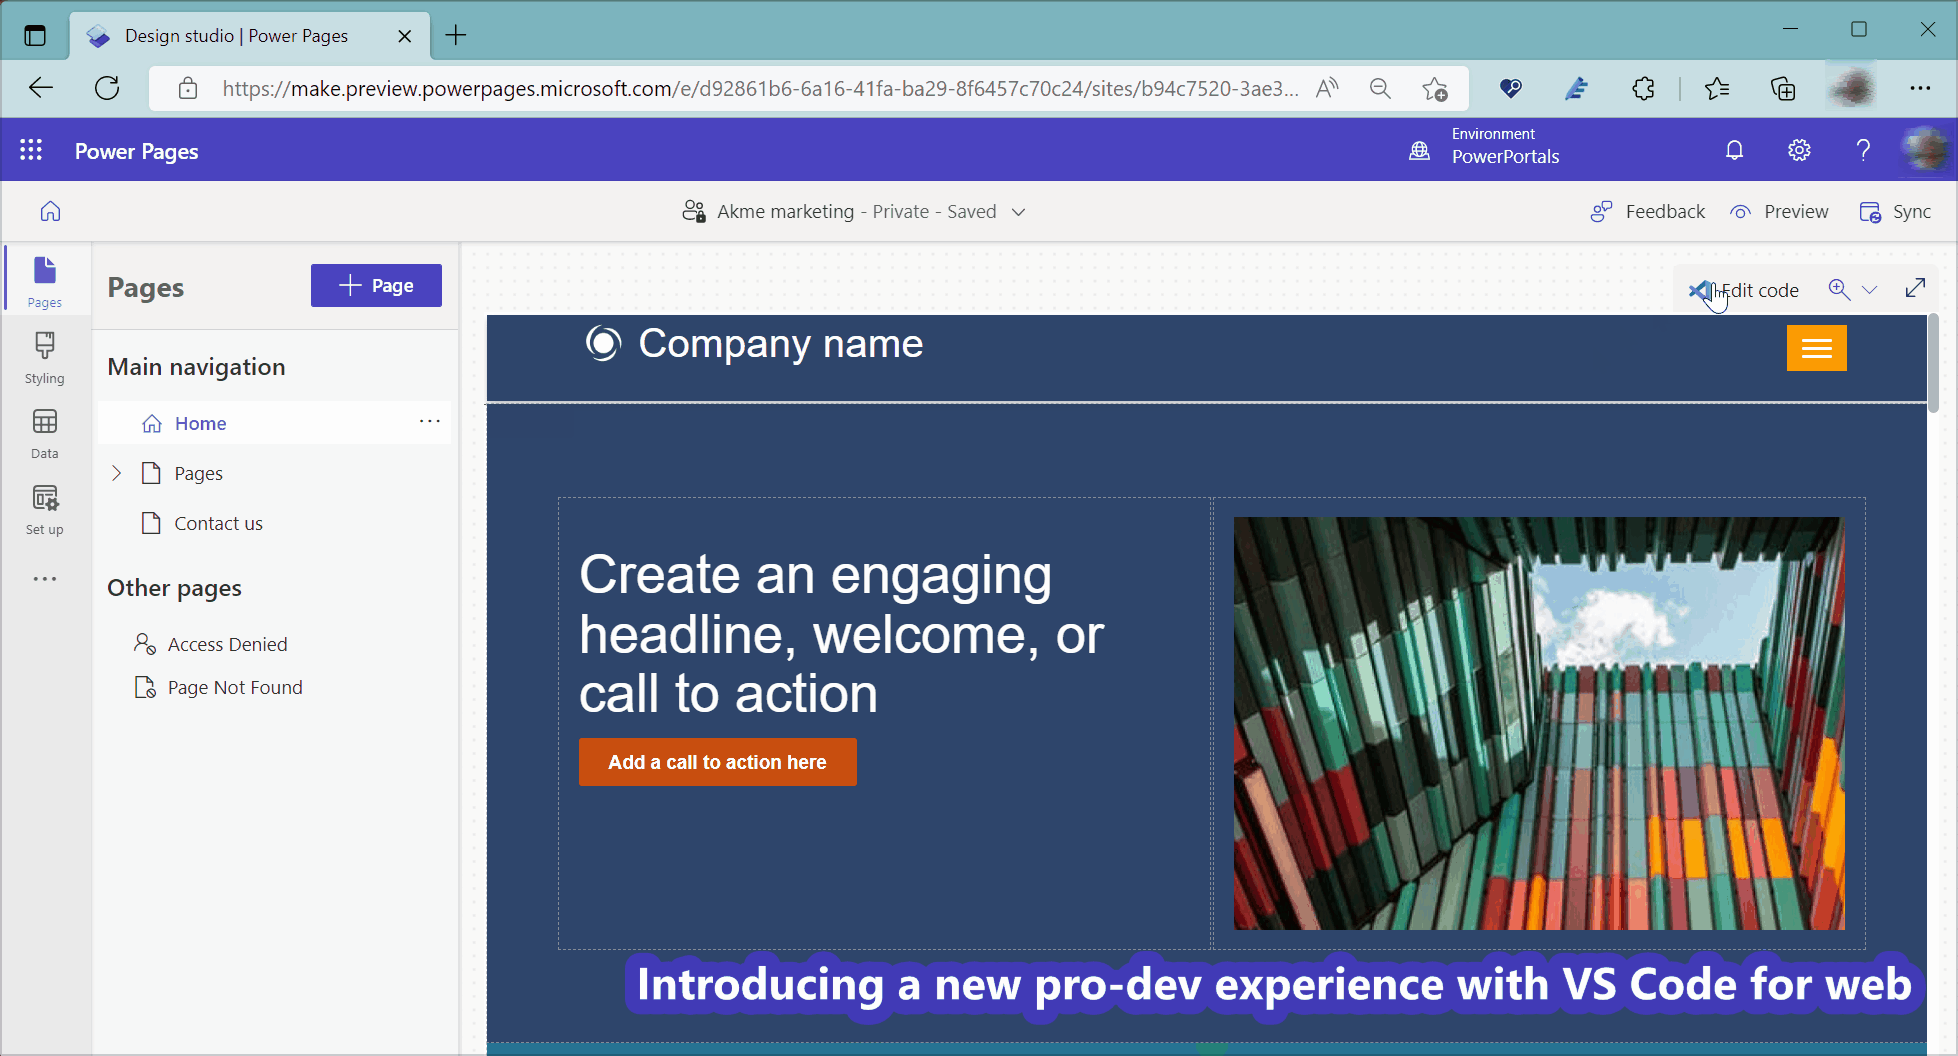 Demo of using Visual Studio Code for Web to edit Power Pages site.